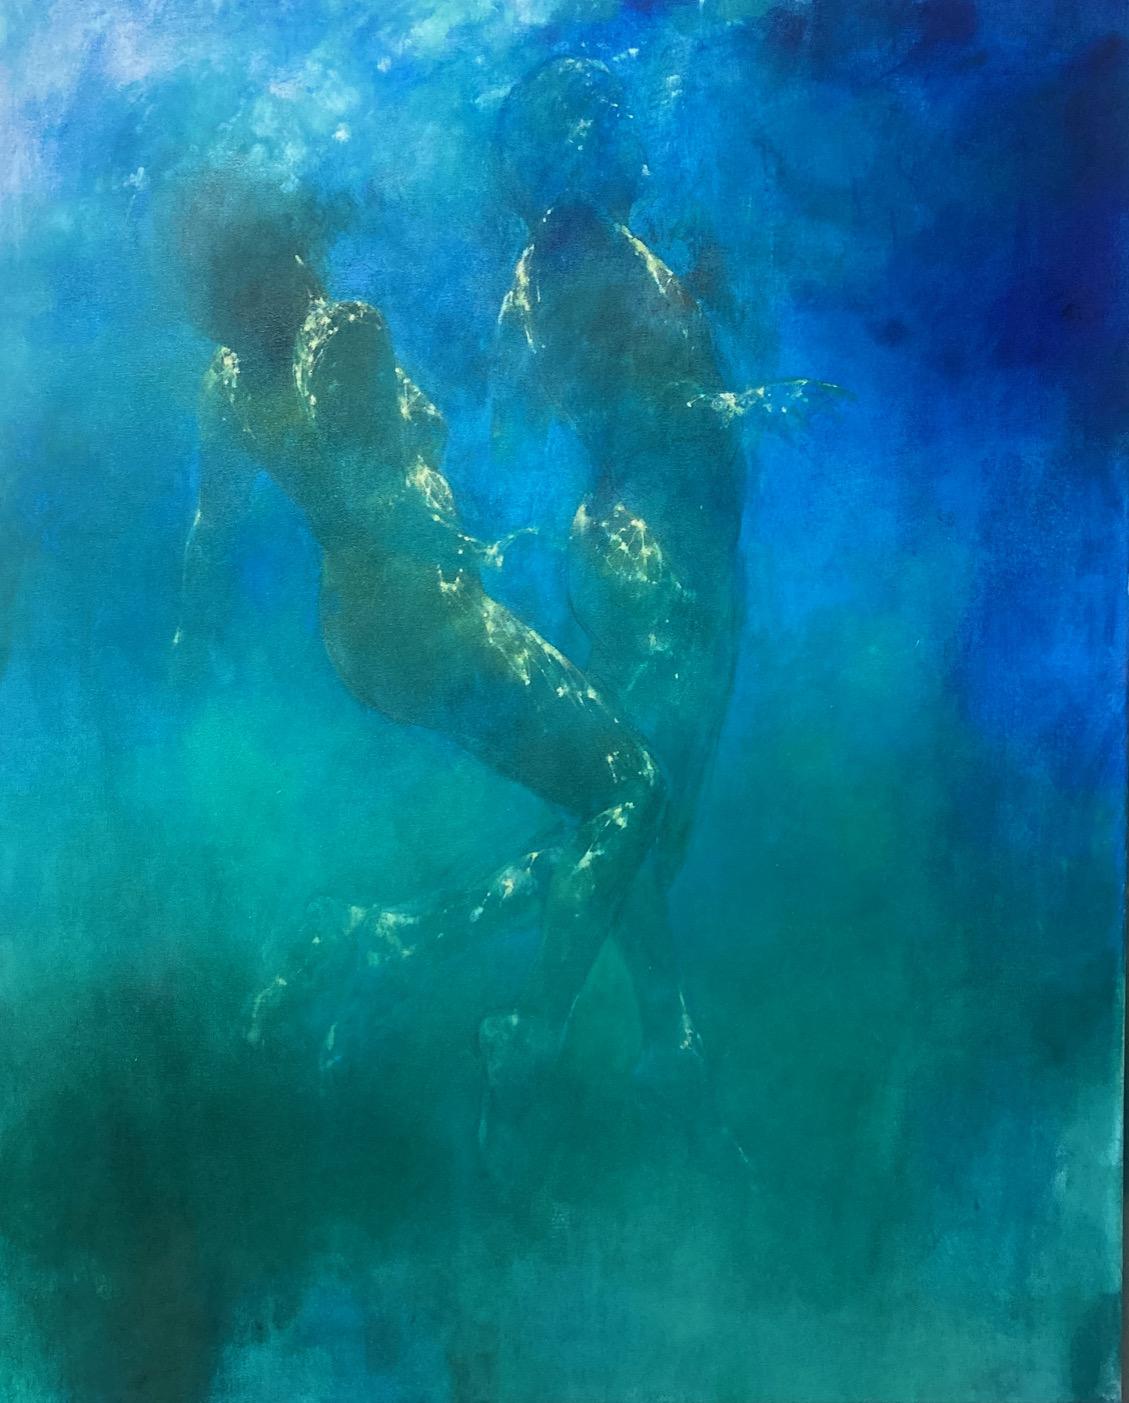  Aqua Serenity - abstract representation of the human form - underwater painting